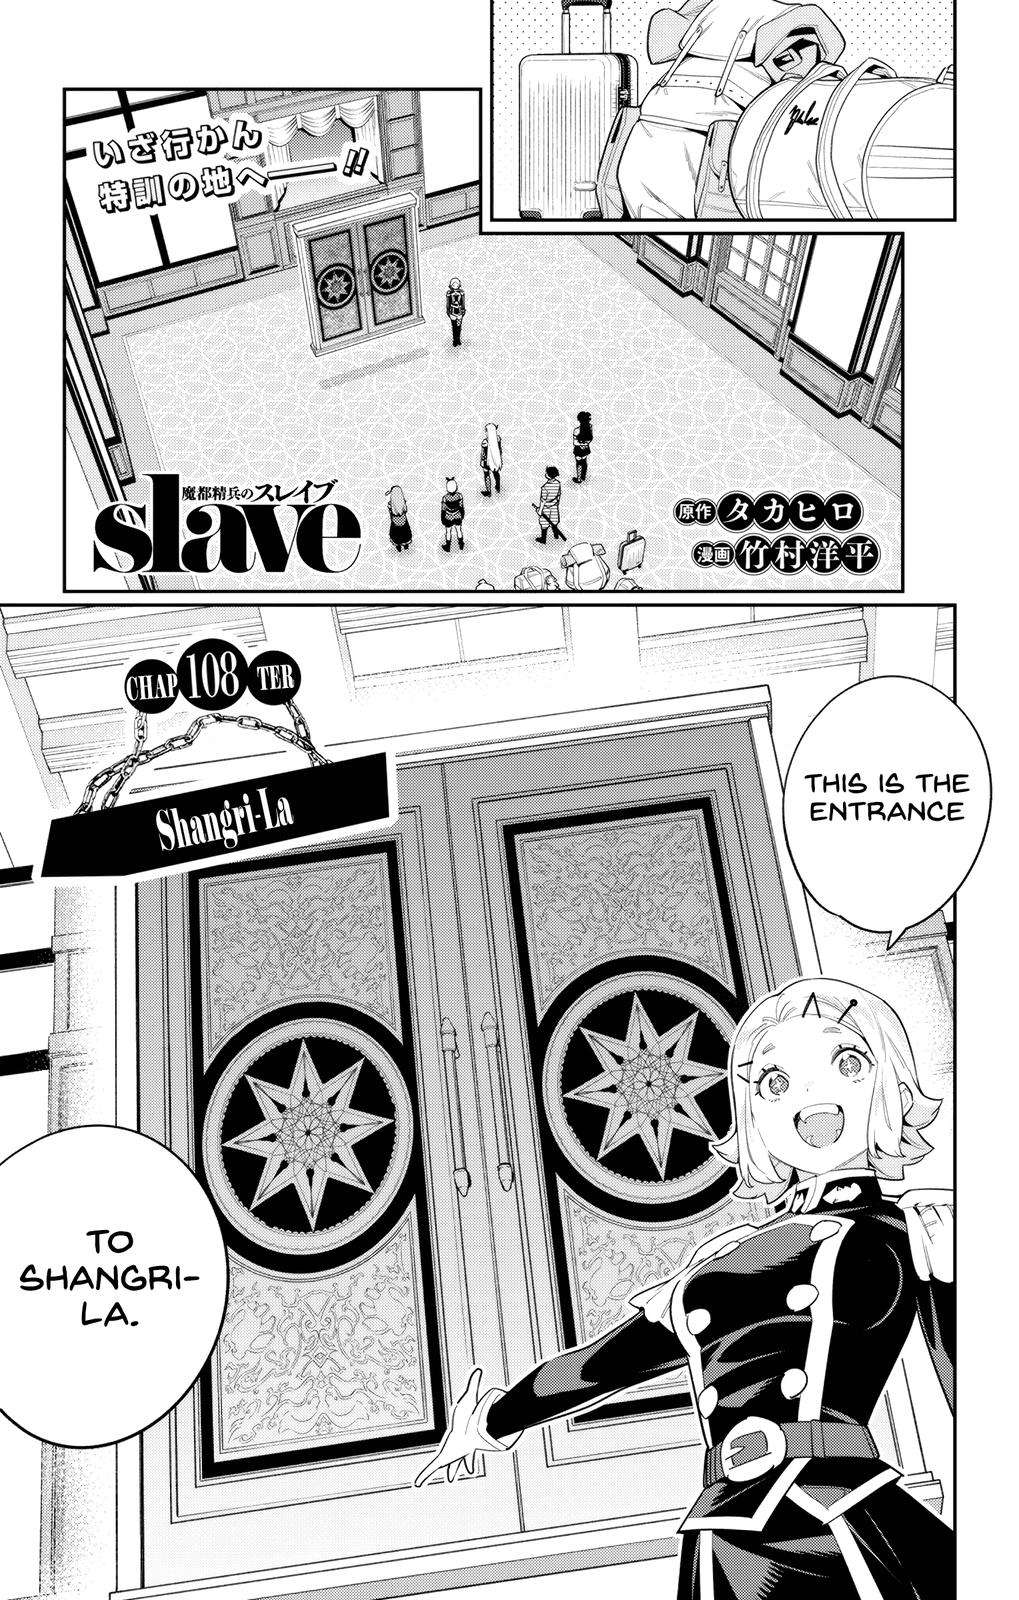 Slave of the Magic Capital's Elite Troops - chapter 108 - #1